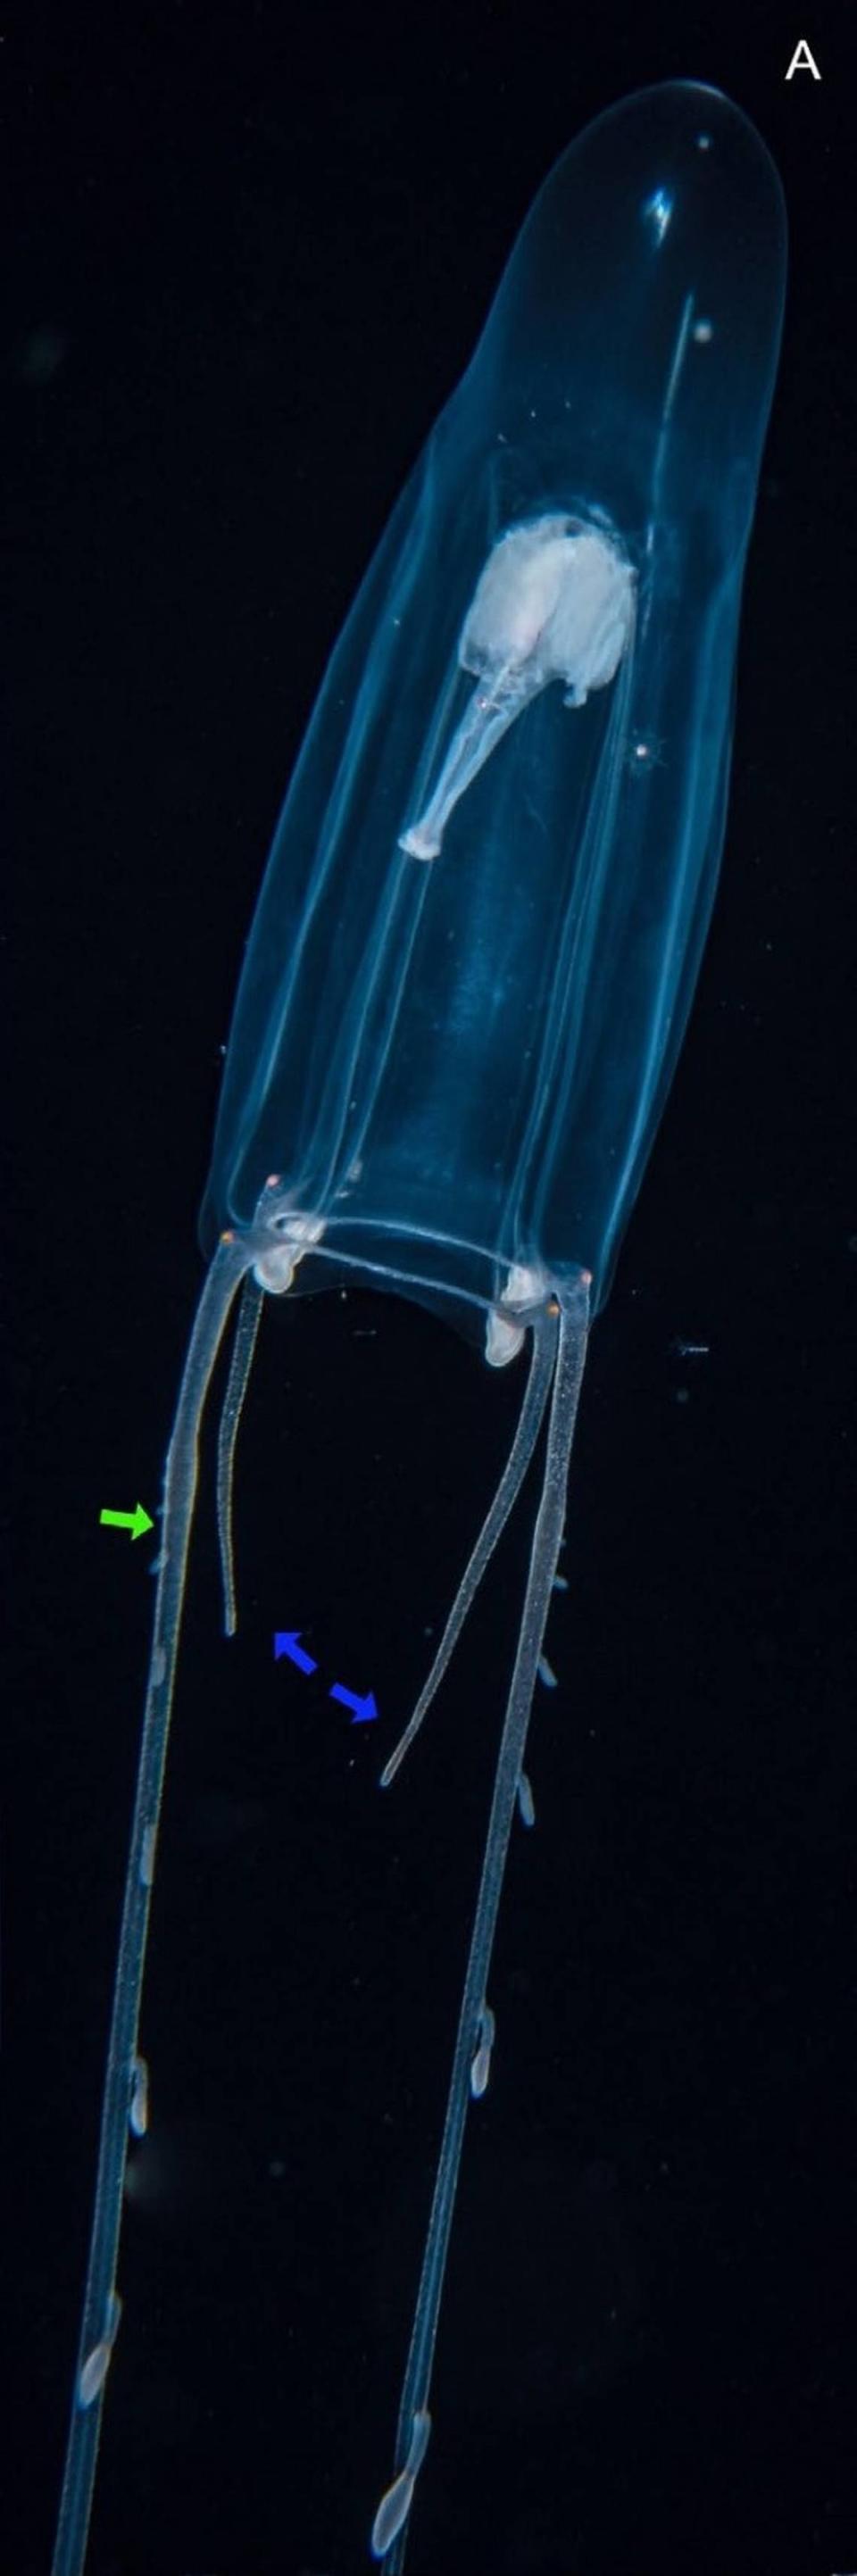 A Zancleopsis grandis, or large Zancleopsis jellyfish, with its body stretched out.